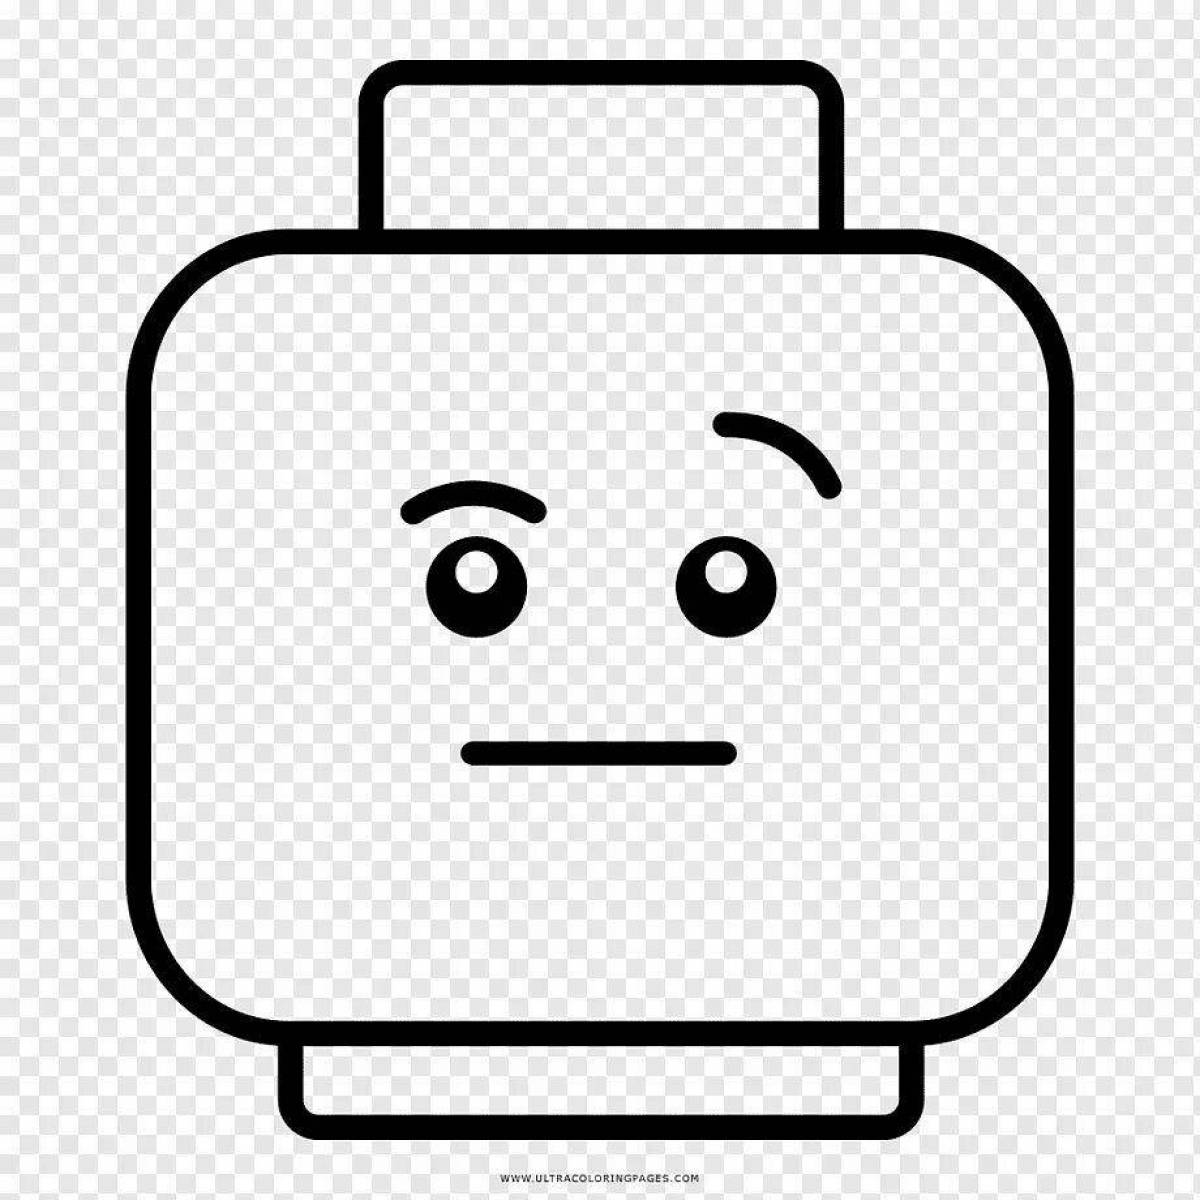 Outstanding lego logo coloring page